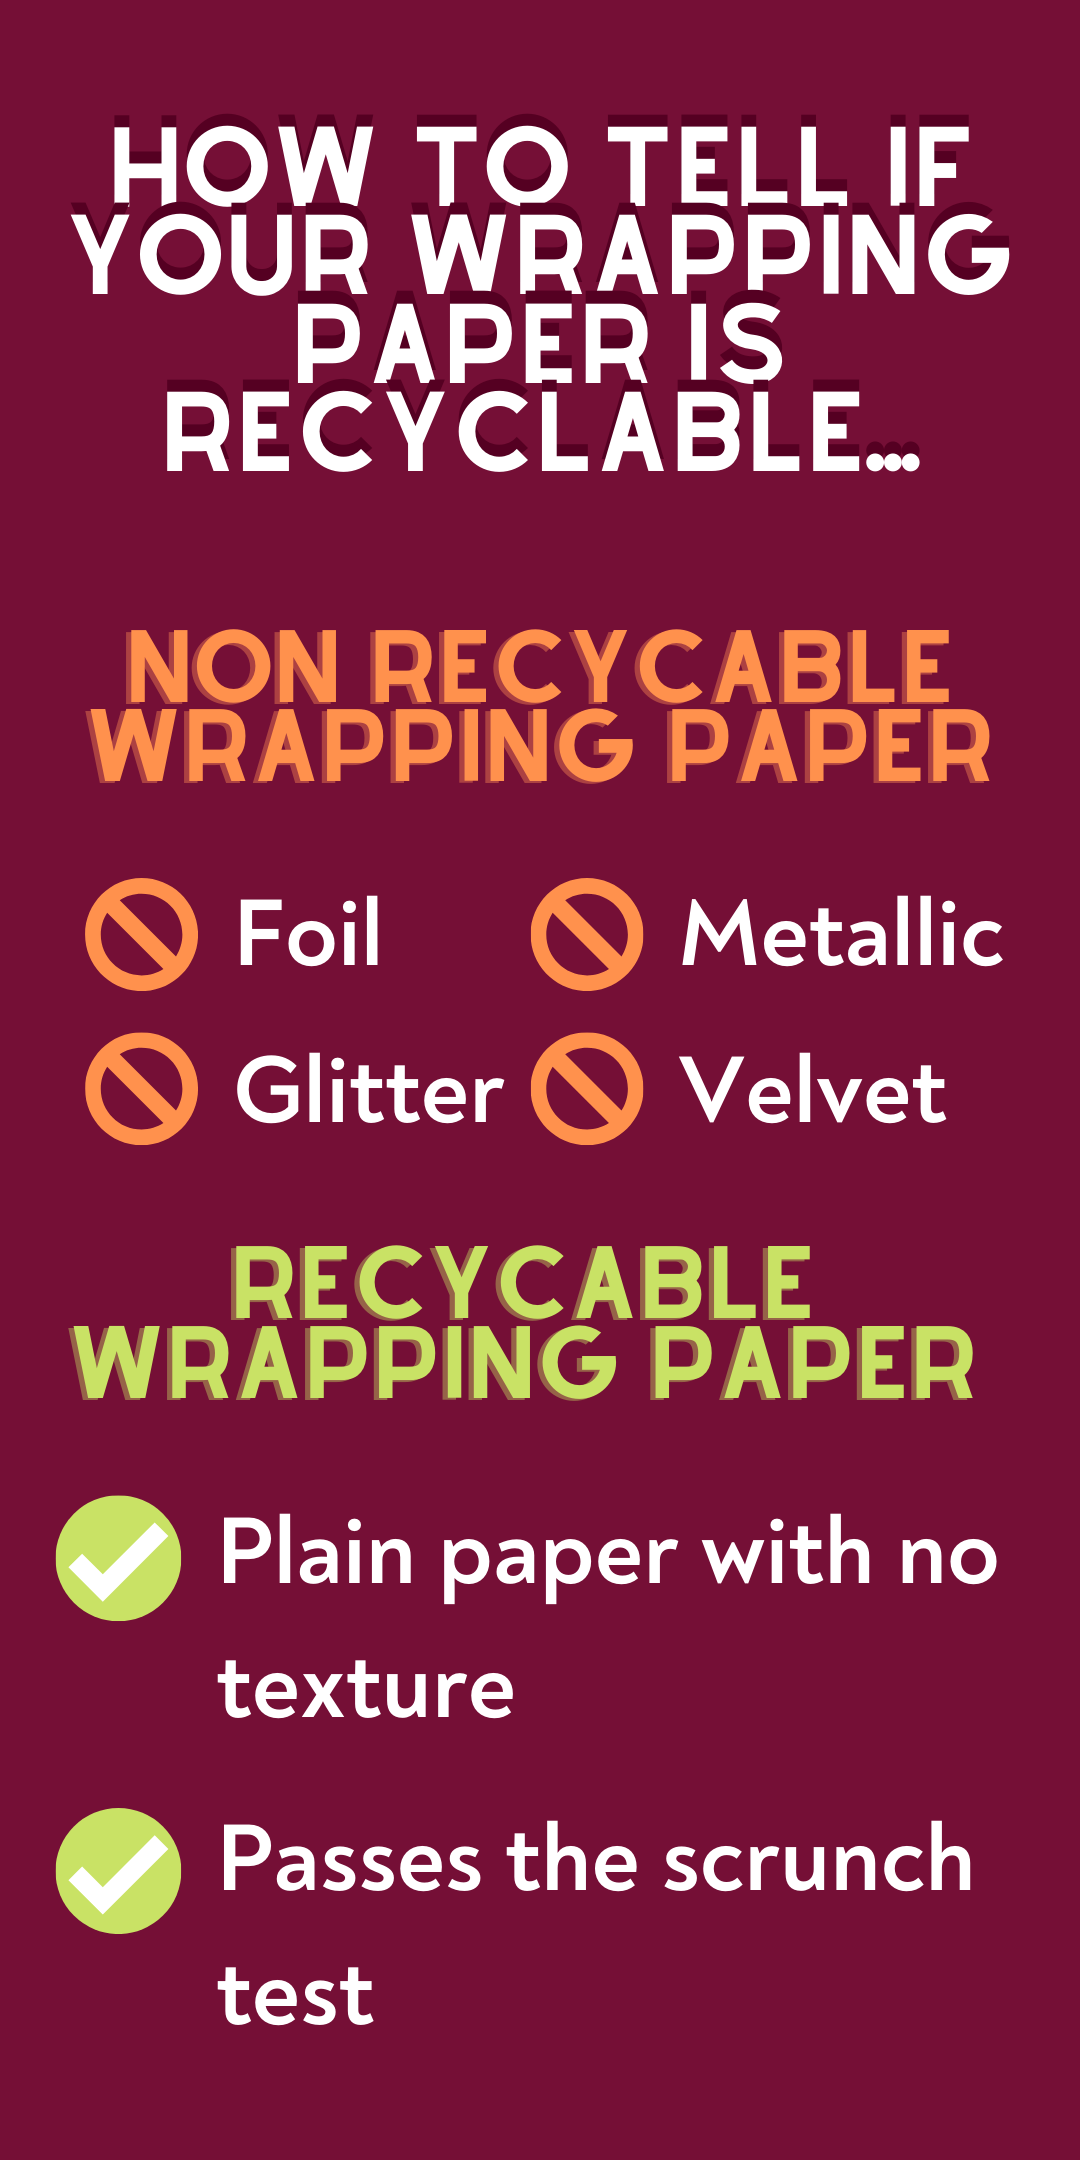 How to tell if your wrapping paper is recyclable